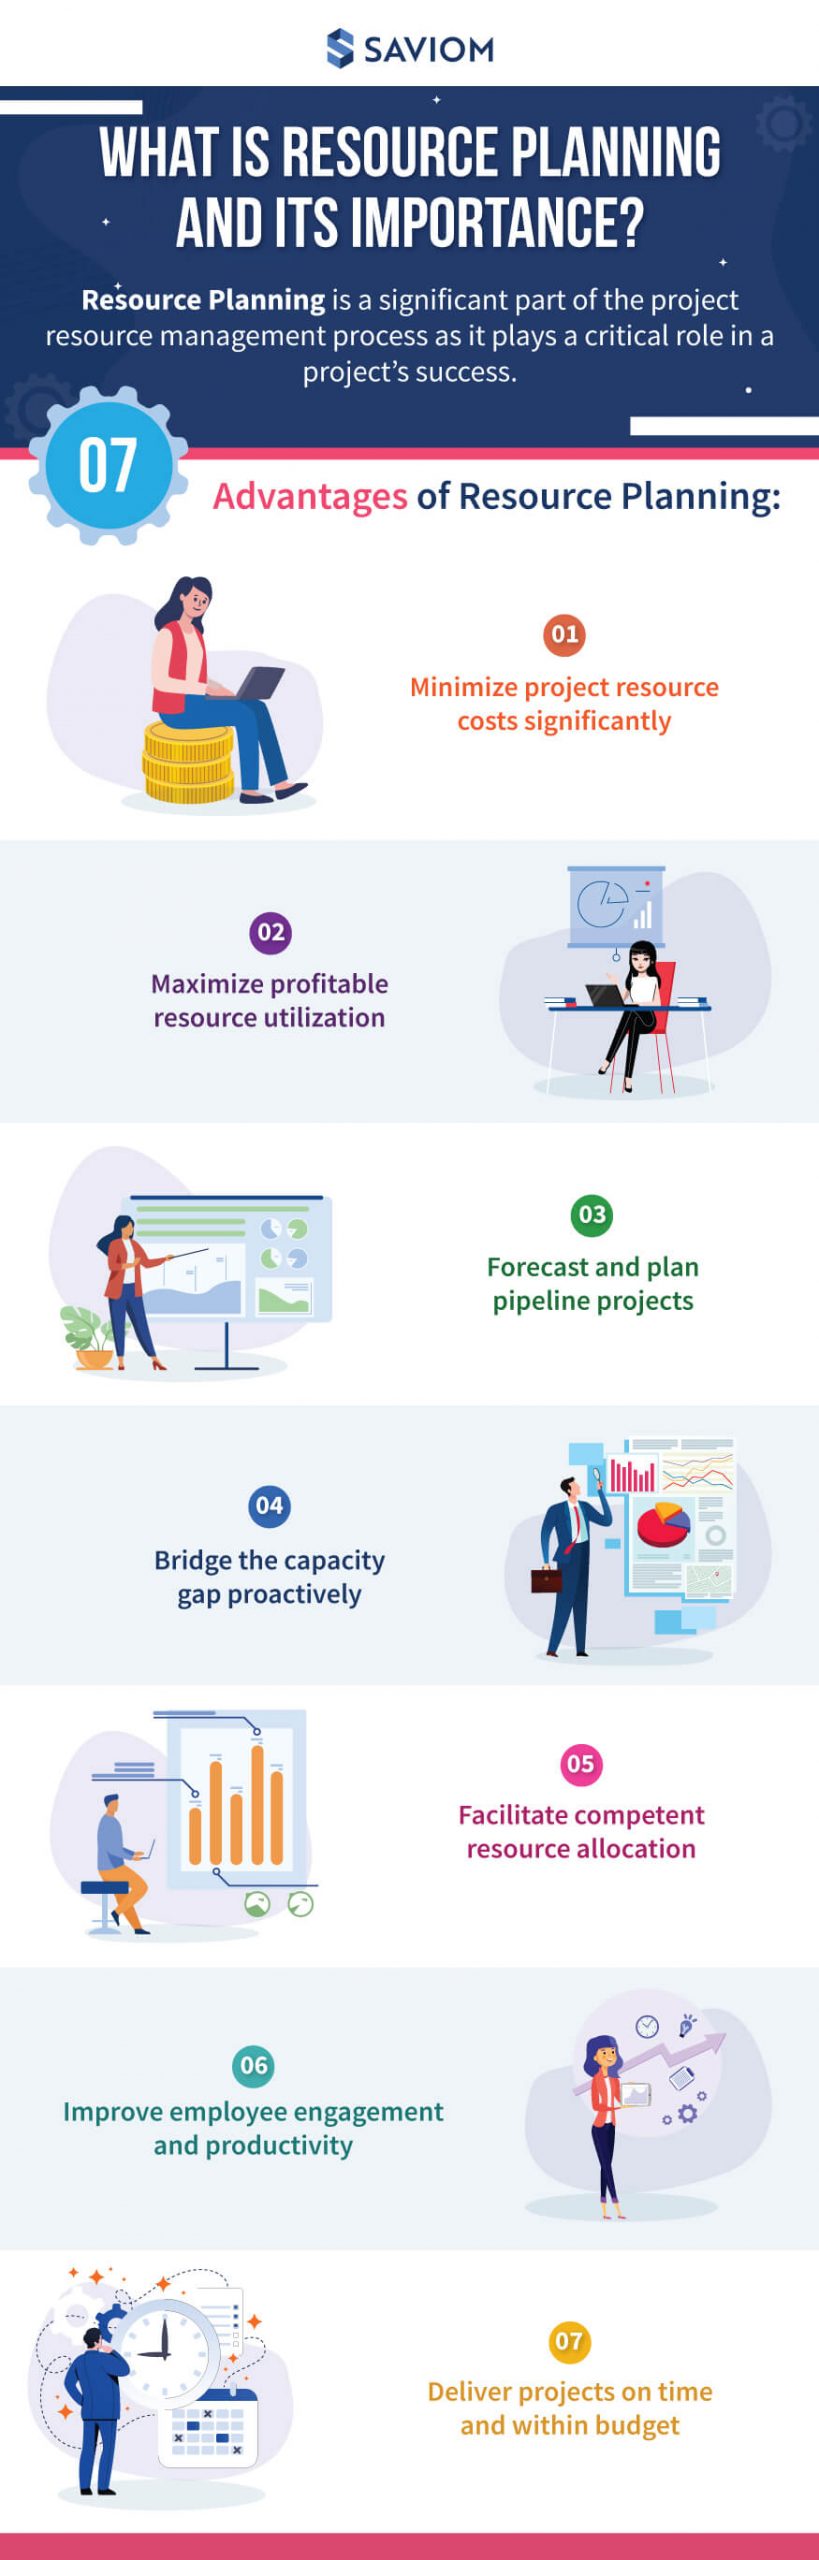 What is Resource Planning and its Importance- Infographic